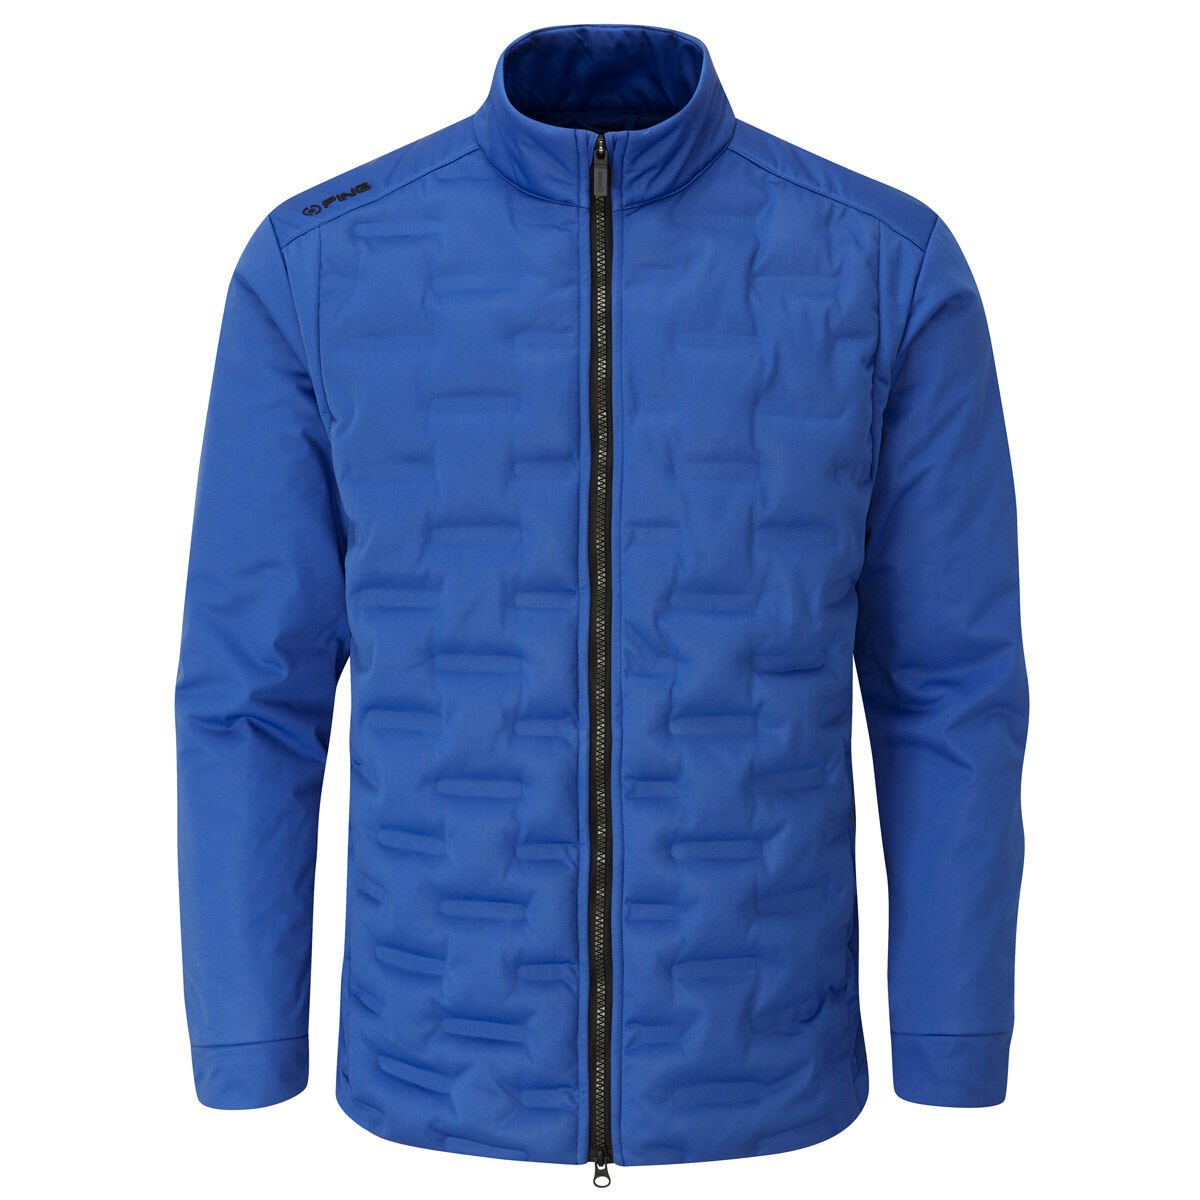 PING Norse S3 Zoned Jacket